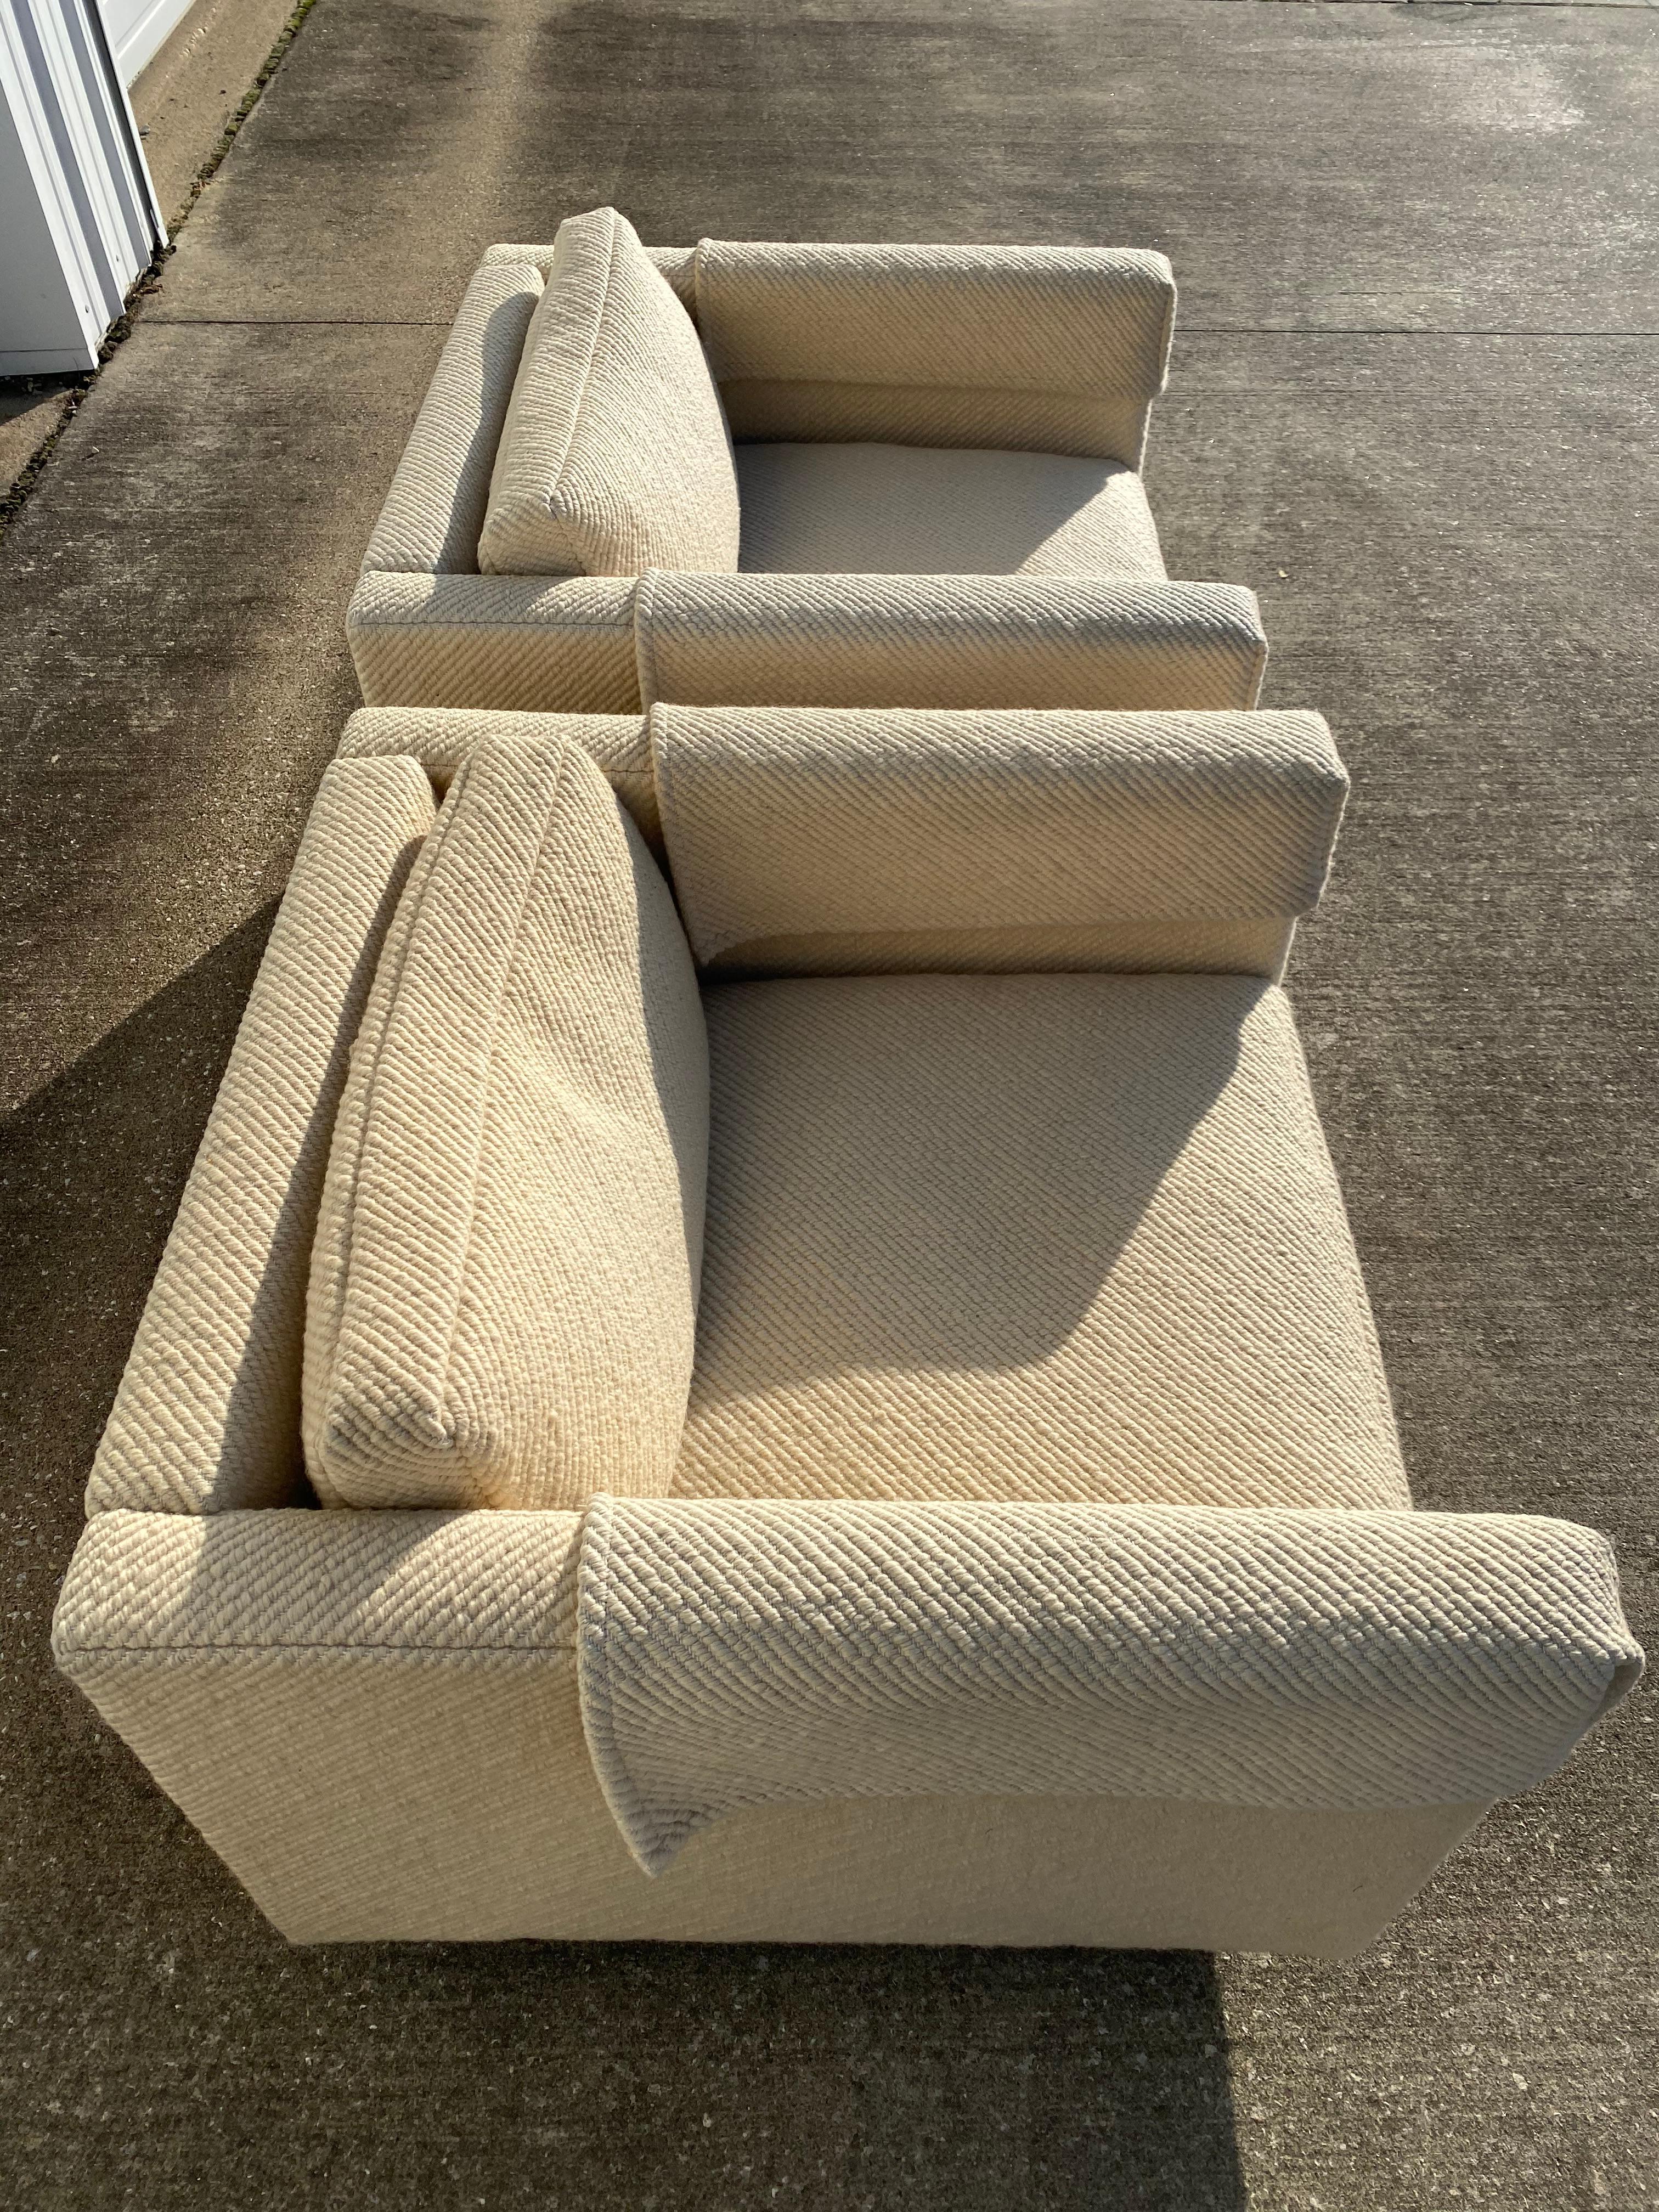 Late 20th Century 1970s Pair of Charles Pfister Cube Lounge Chairs for Knoll in Original Wool Fabr